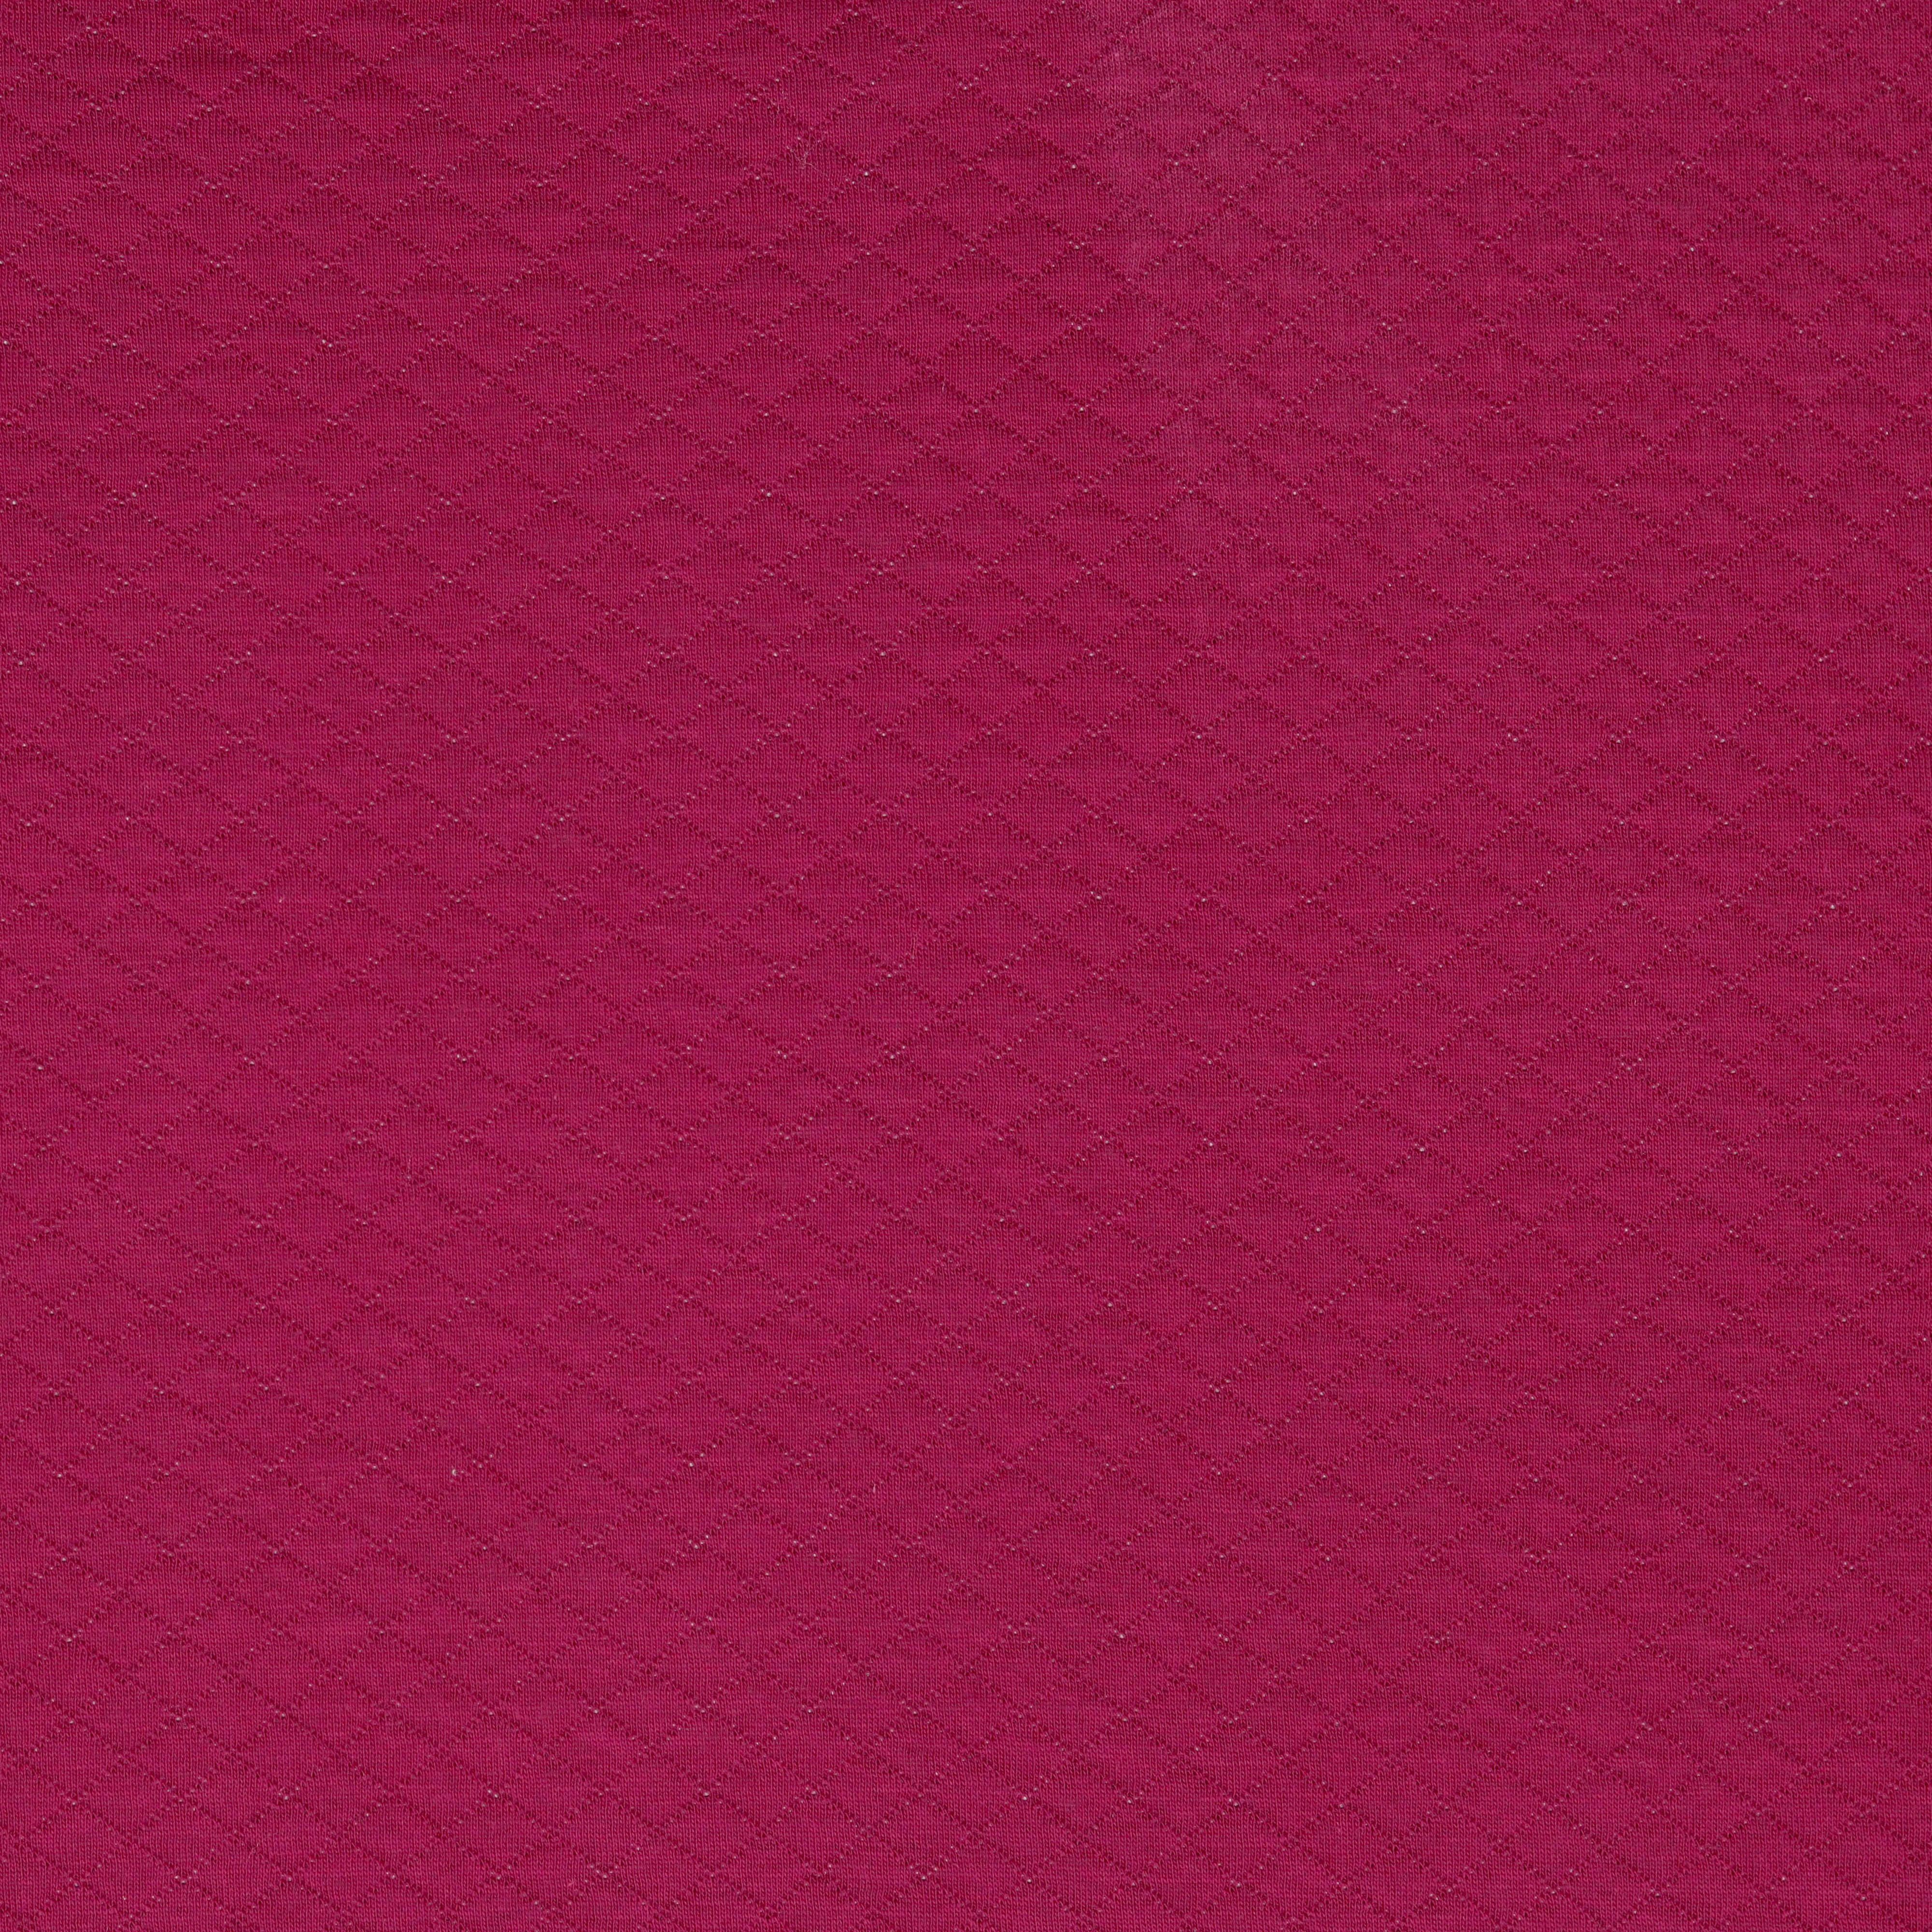 Diamond Jacquard Quilted Knit in Cerise Pink